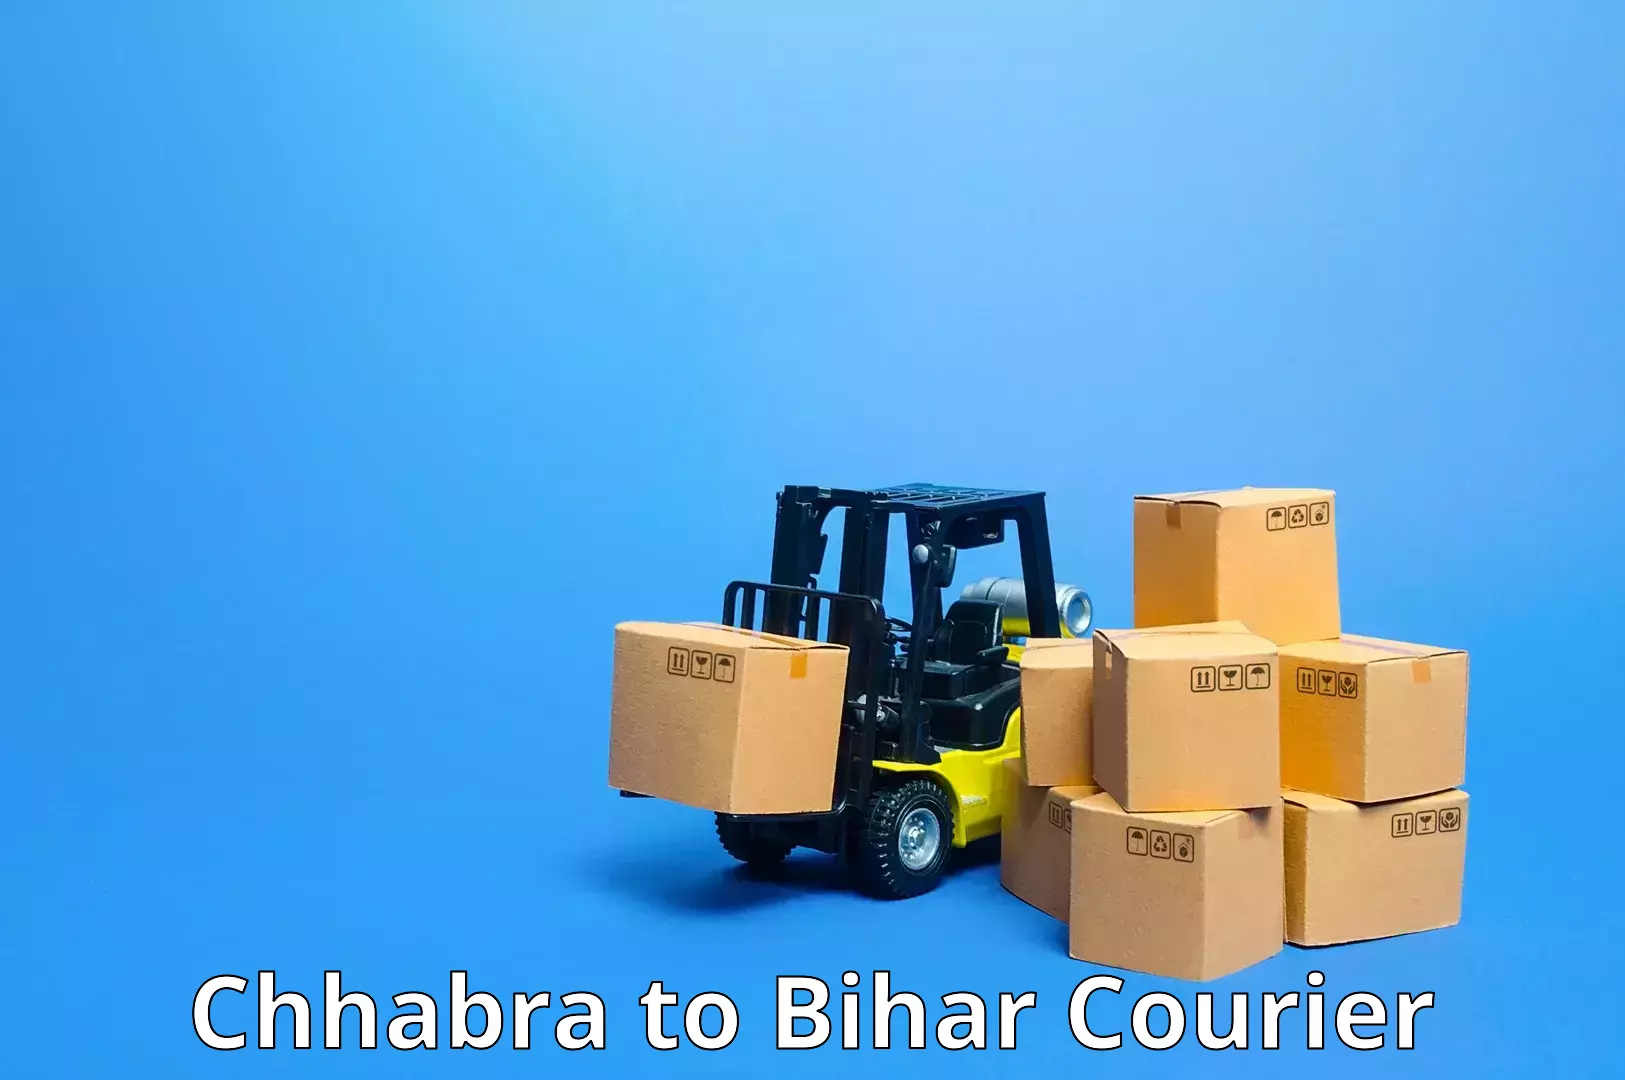 Full-service courier options Chhabra to Bihar